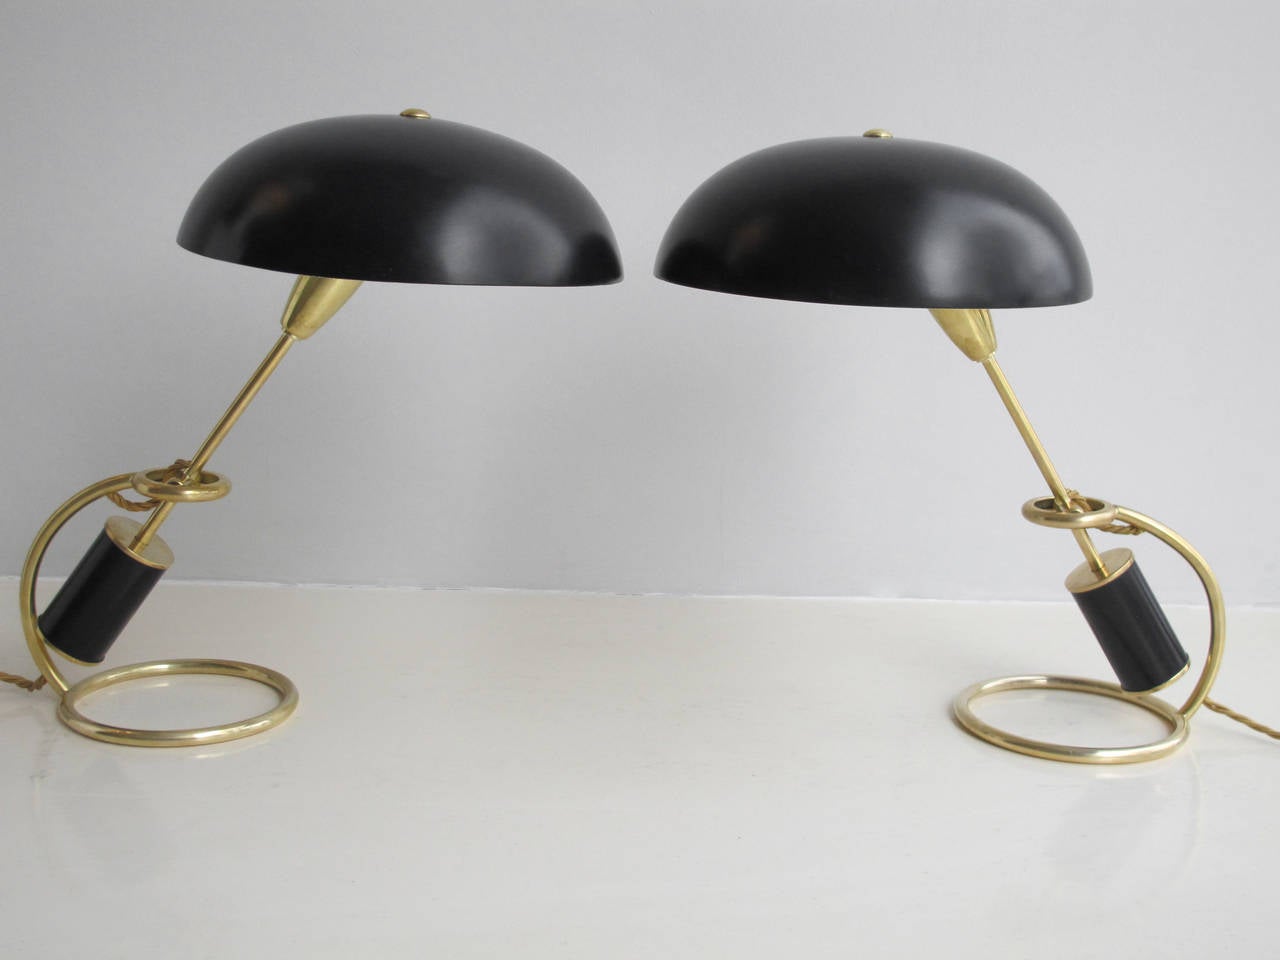 Pair of ‘Scrittoio’ counter weight desk lamps in brass and painted metal.
Designed by Angelo Lelli. Stamped.
Produced by Arredoluce.
1951.
Italy.